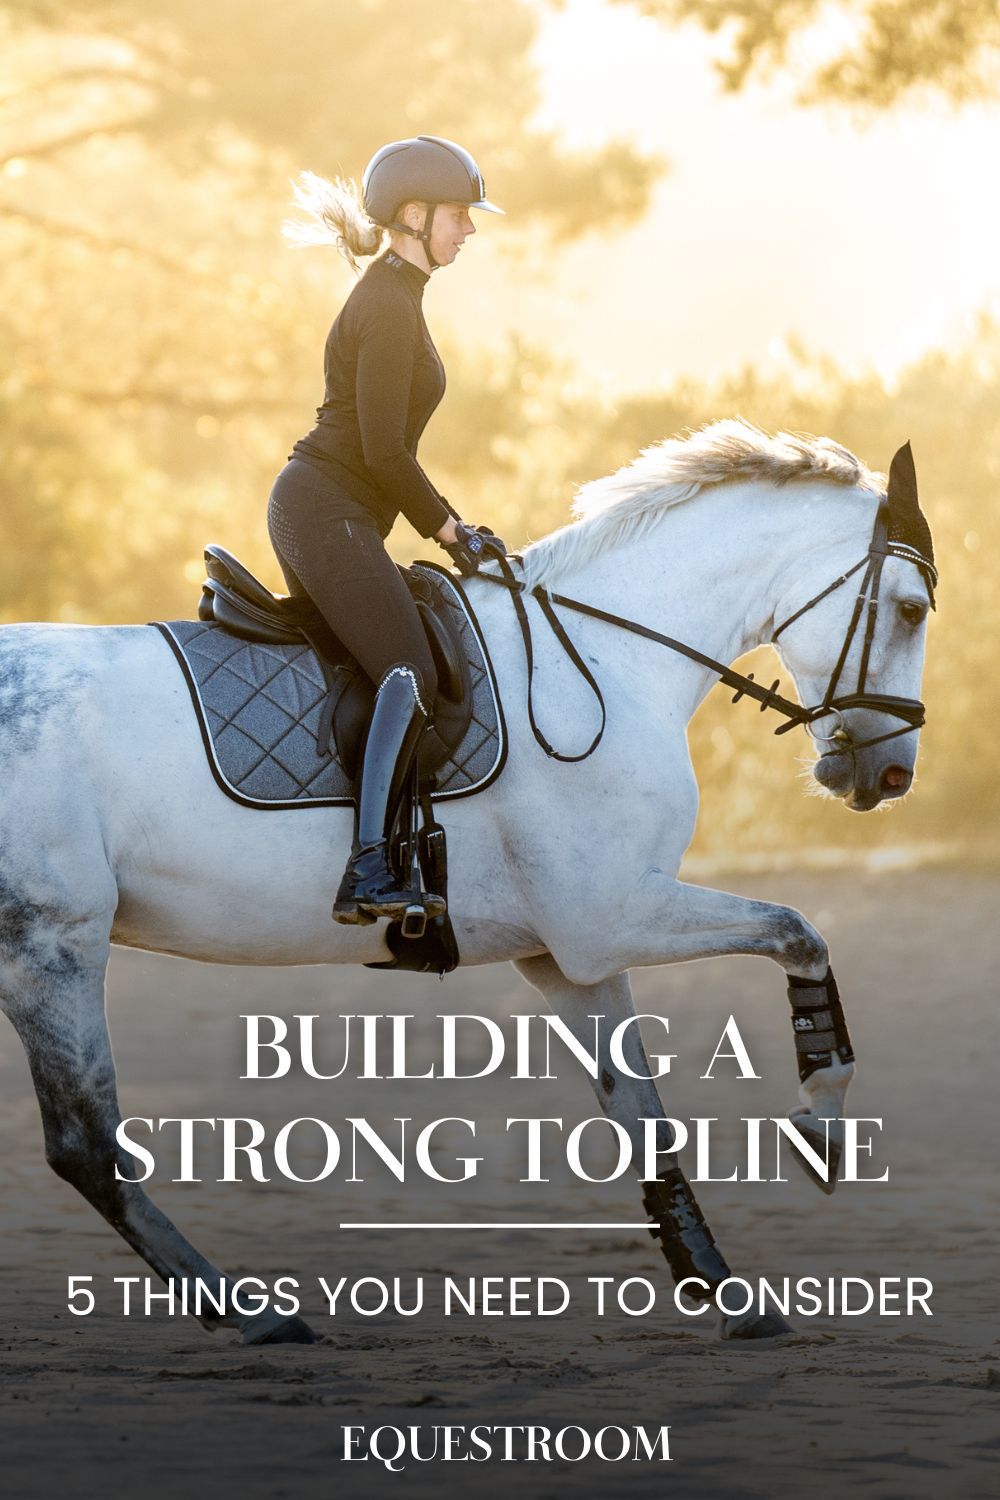 BUILDING A STRONG TOPLINE